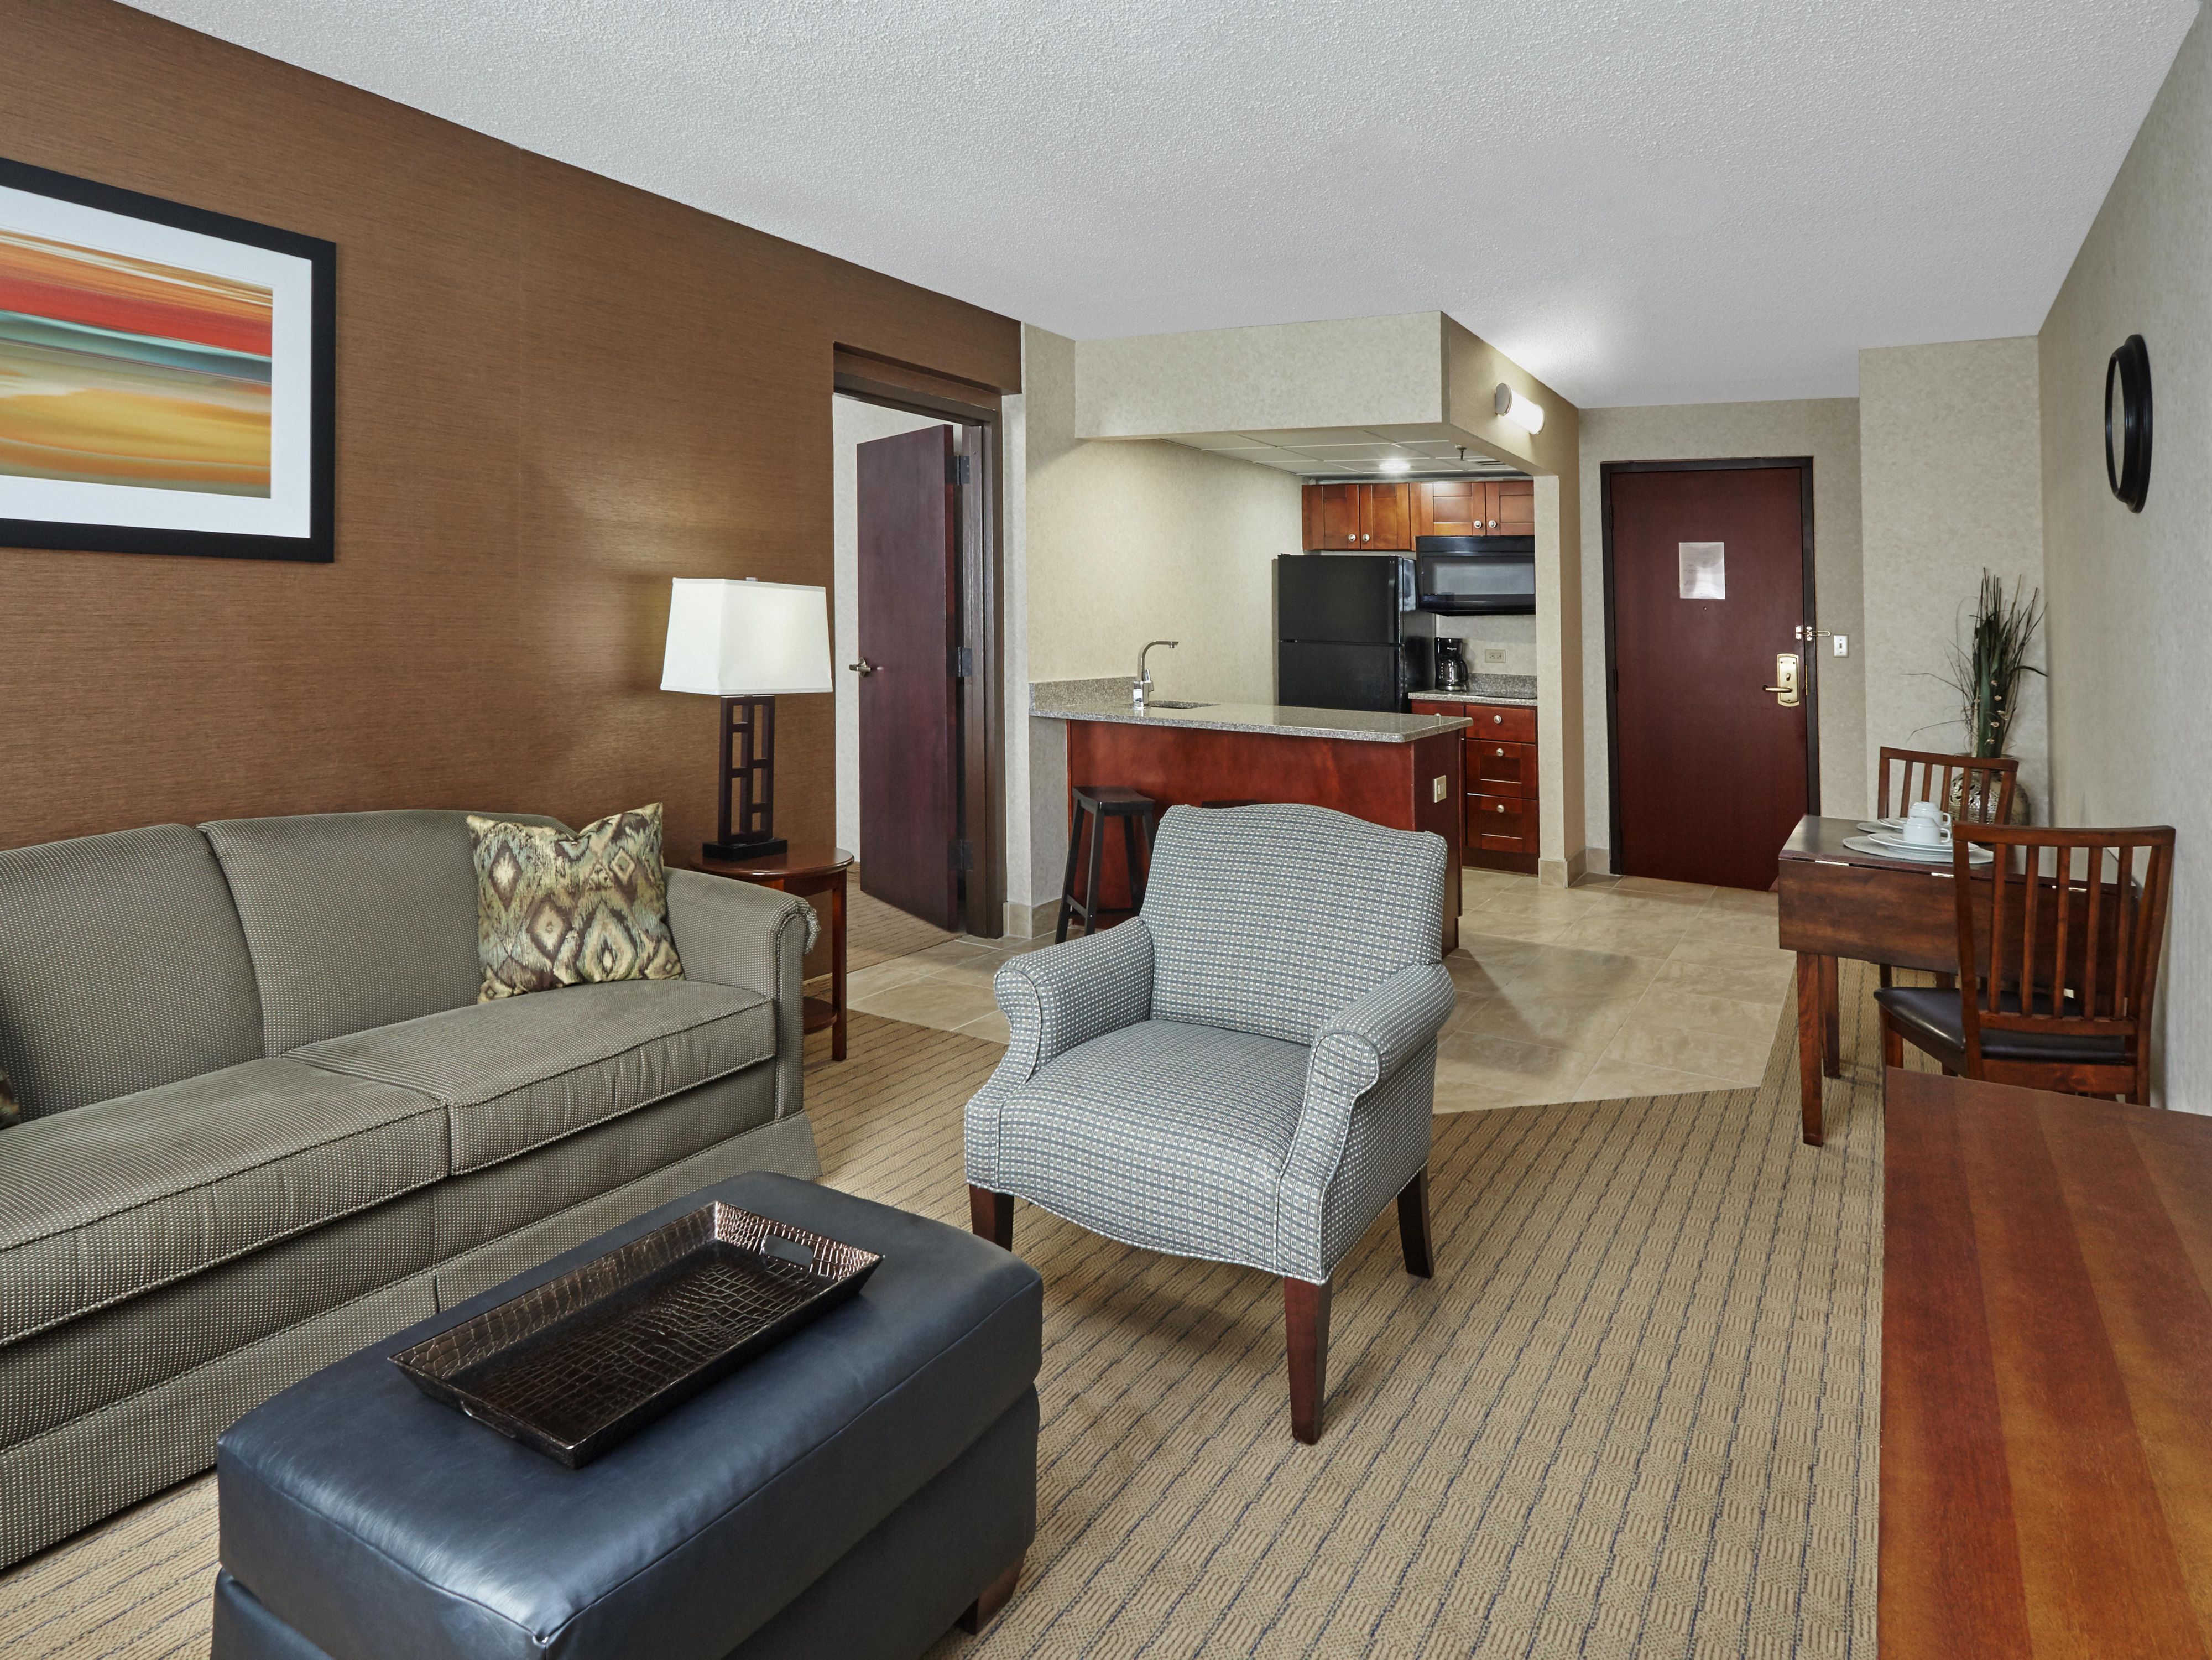 Holiday Inn Carol Stream offers apartment-style units for those needing to stay for thirty nights or more. We welcome families or individuals who are relocating to the area with our two-room suites. Contact our Sales Department for long-term pricing. Let us be your home away from home, where you can enjoy our superior service. 